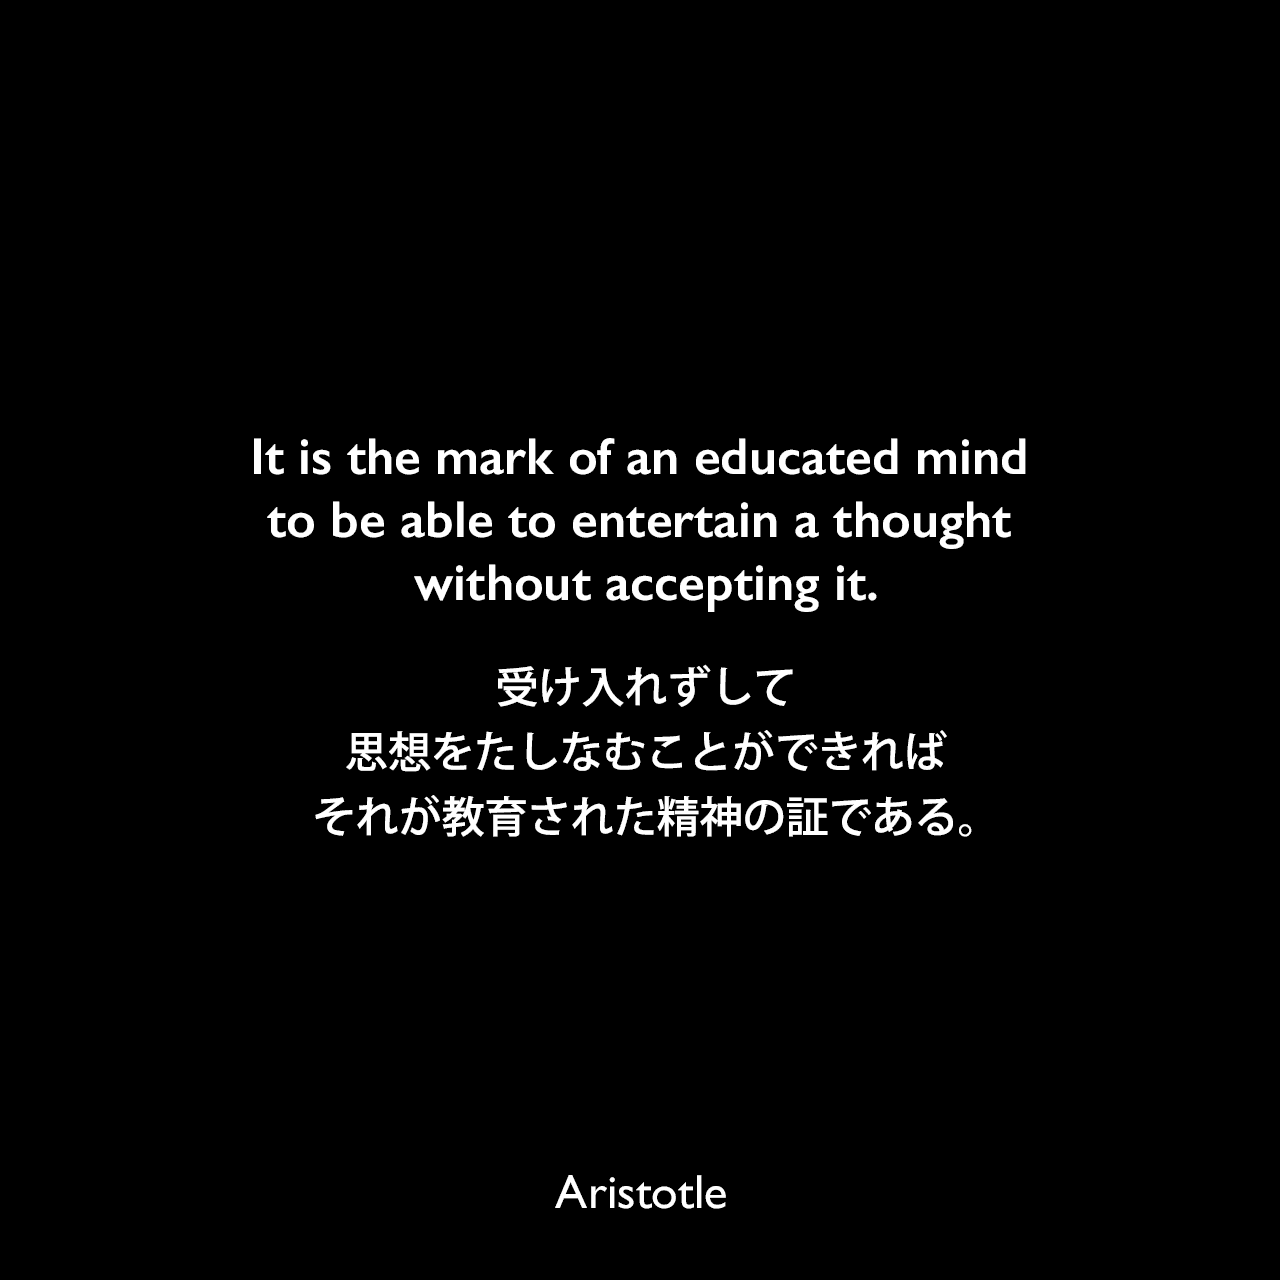 It is the mark of an educated mind to be able to entertain a thought without accepting it.受け入れずして思想をたしなむことができれば、それが教育された精神の証である。Aristotle